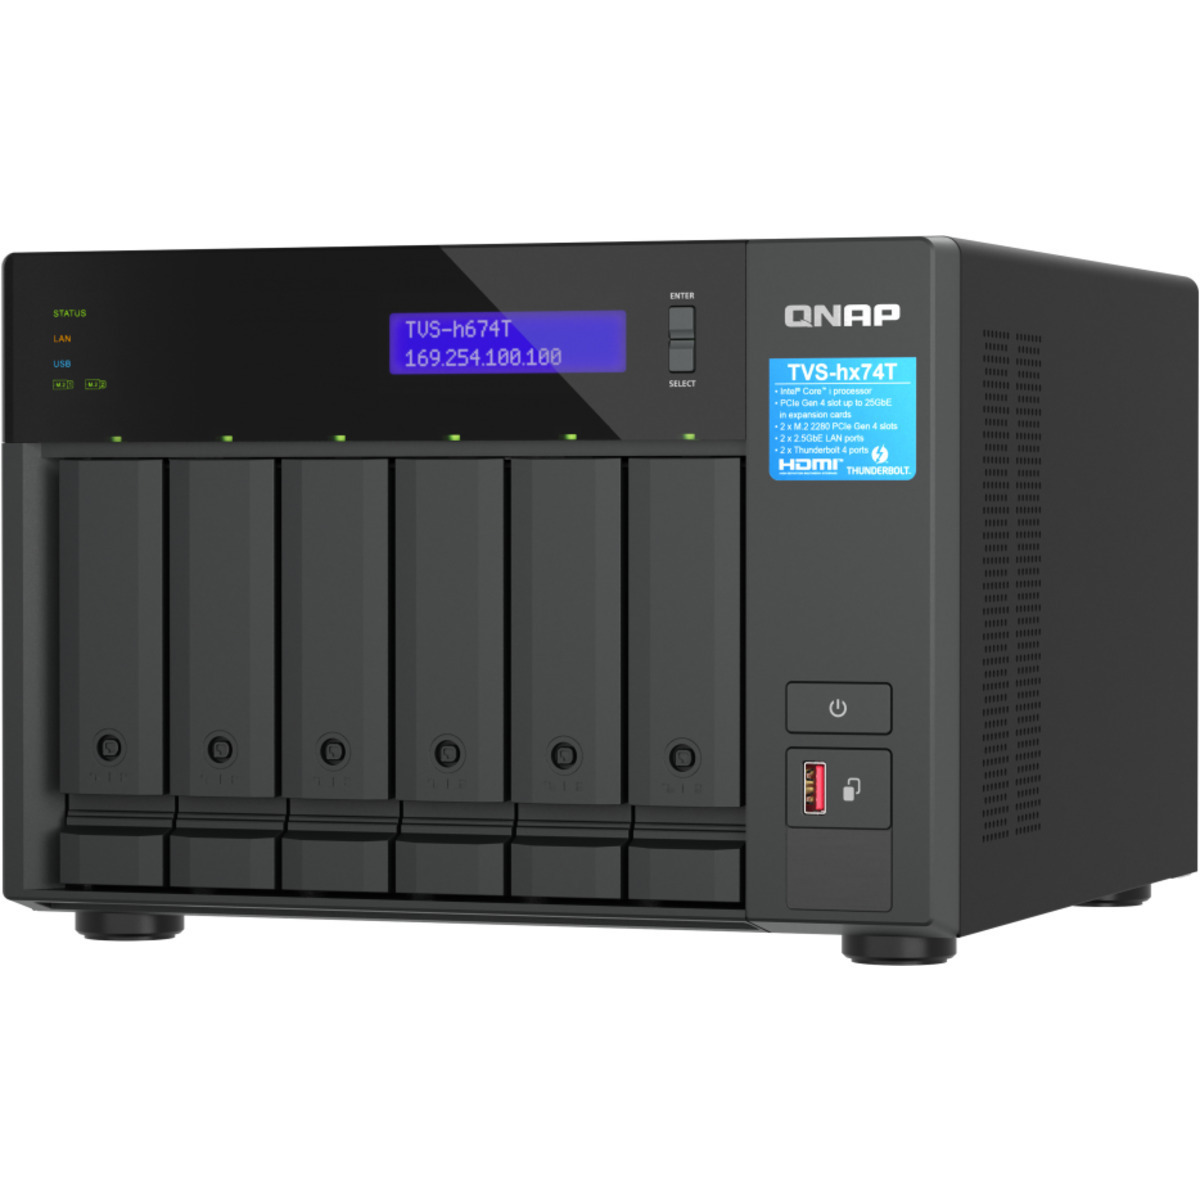 buy QNAP TVS-h674T Core i5 Thunderbolt 4 24tb Desktop DAS-NAS - Combo Direct + Network Storage Device 6x4000gb Samsung 870 EVO MZ-77E4T0BAM 2.5 560/530MB/s SATA 6Gb/s SSD CONSUMER Class Drives Installed - Burn-In Tested - nas headquarters buy network attached storage server device das new raid-5 free shipping usa spring sale TVS-h674T Core i5 Thunderbolt 4